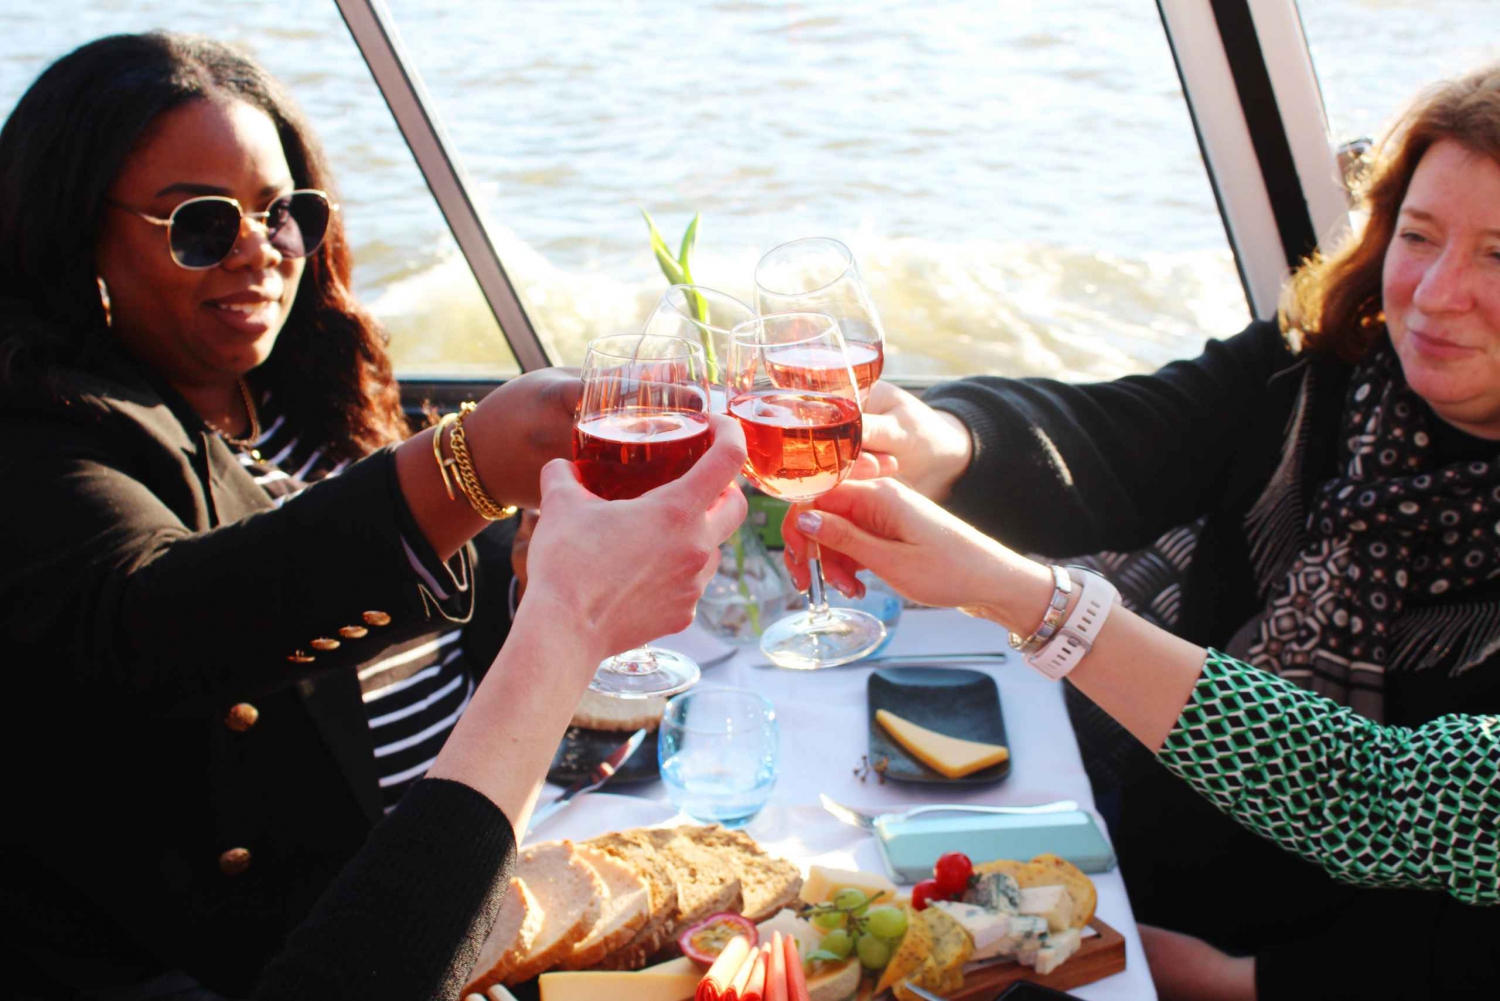 Amsterdam: Wine and Cheese Evening Cruise